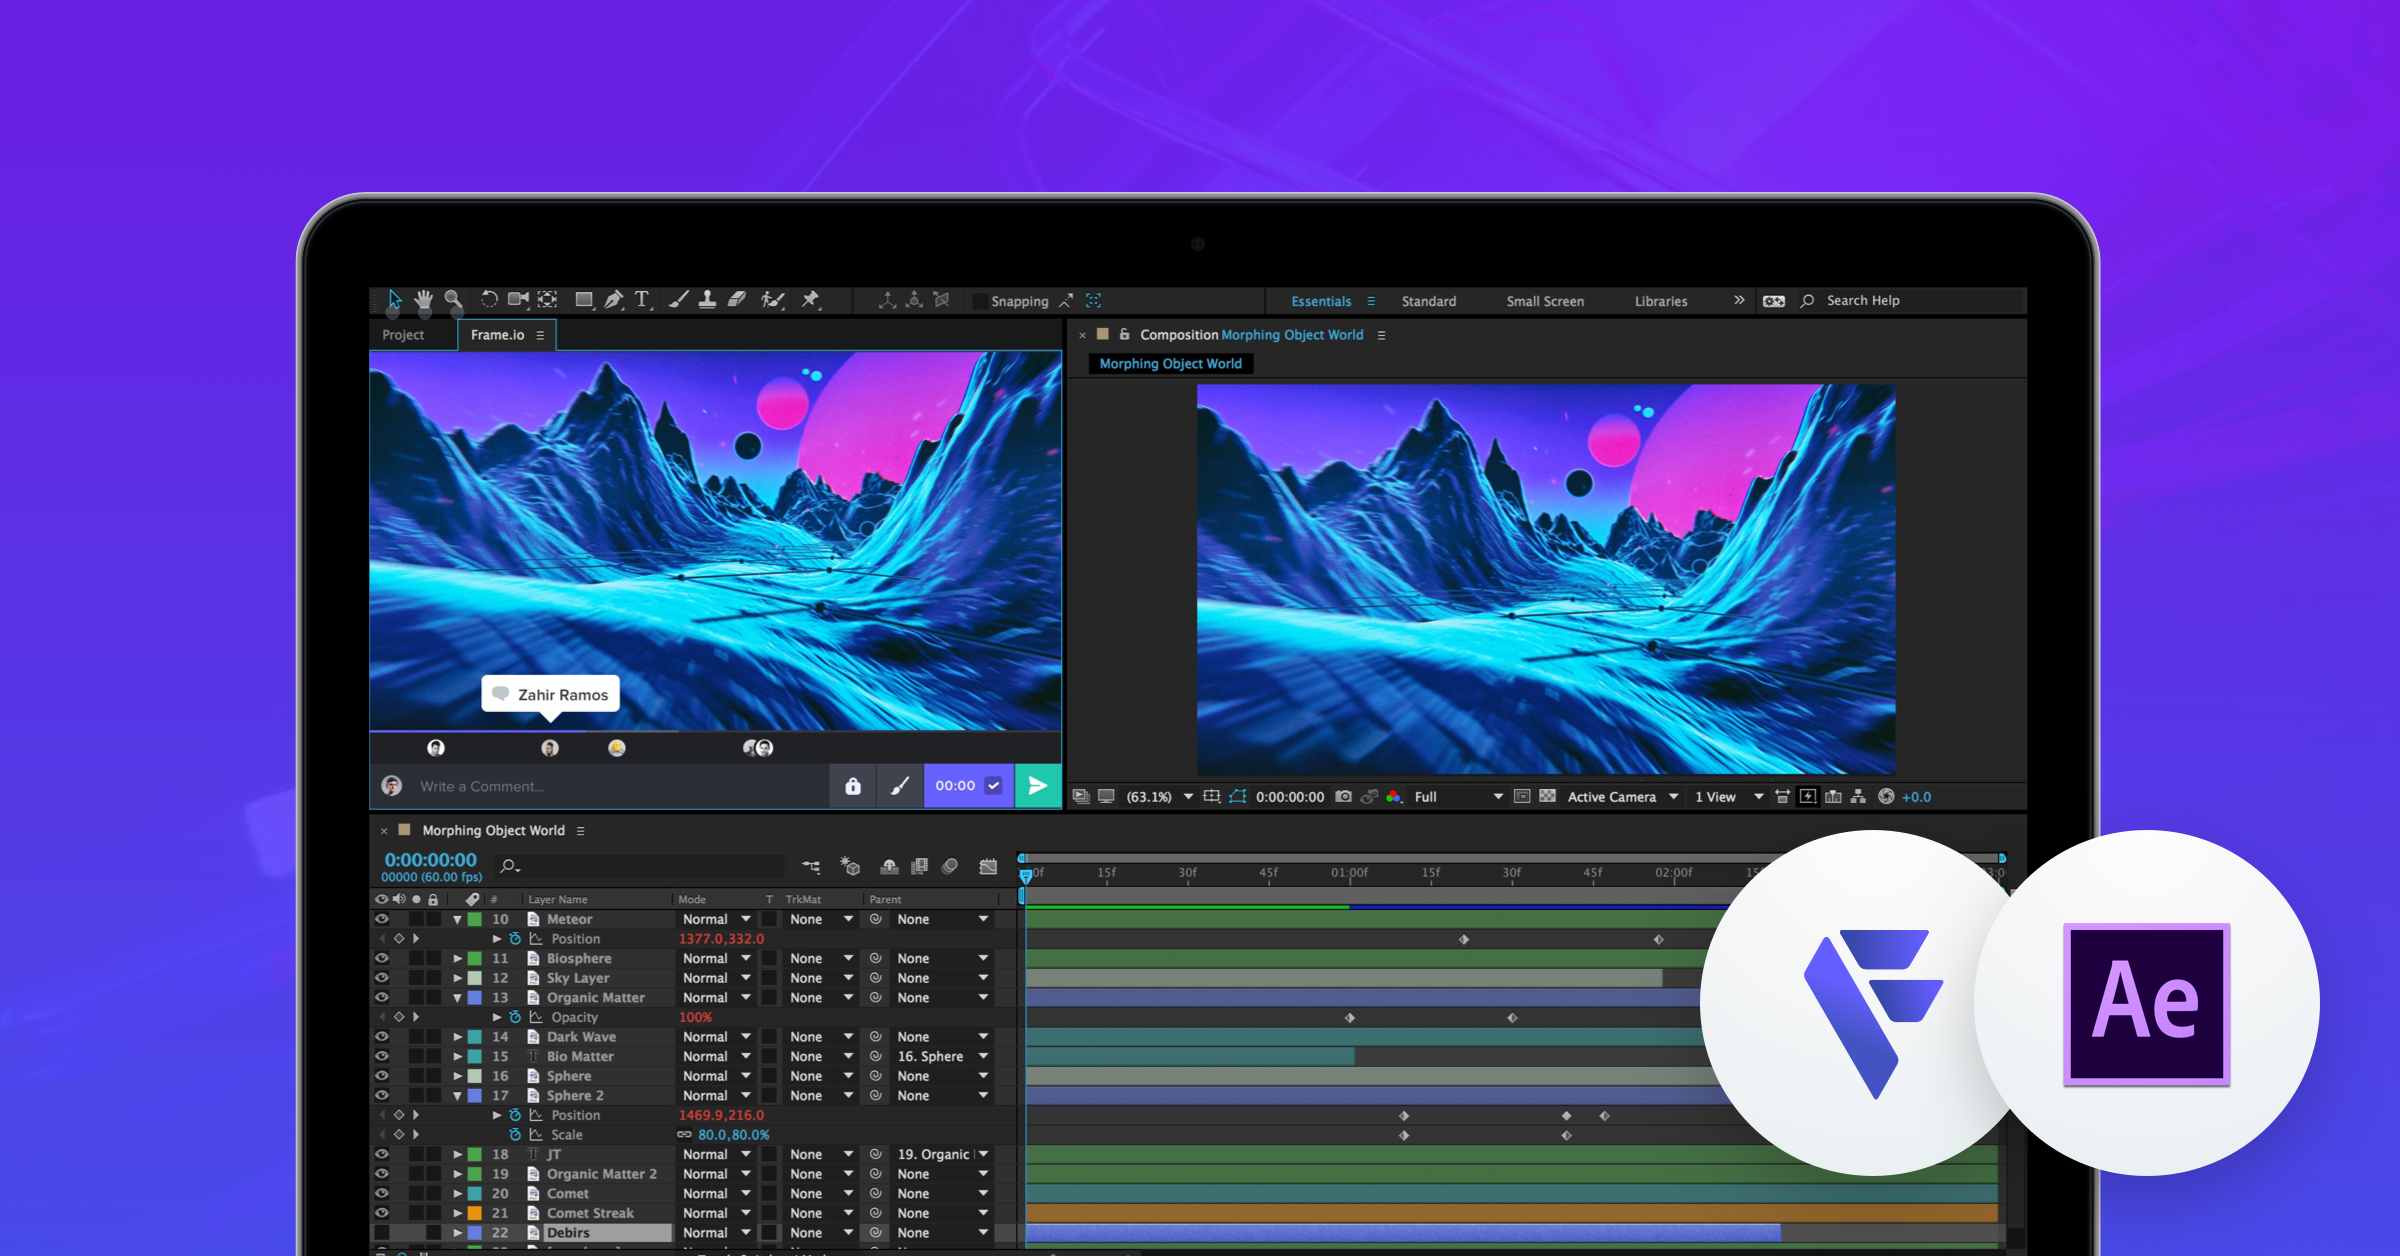 Introducing Frame.io for Adobe After Effects CC